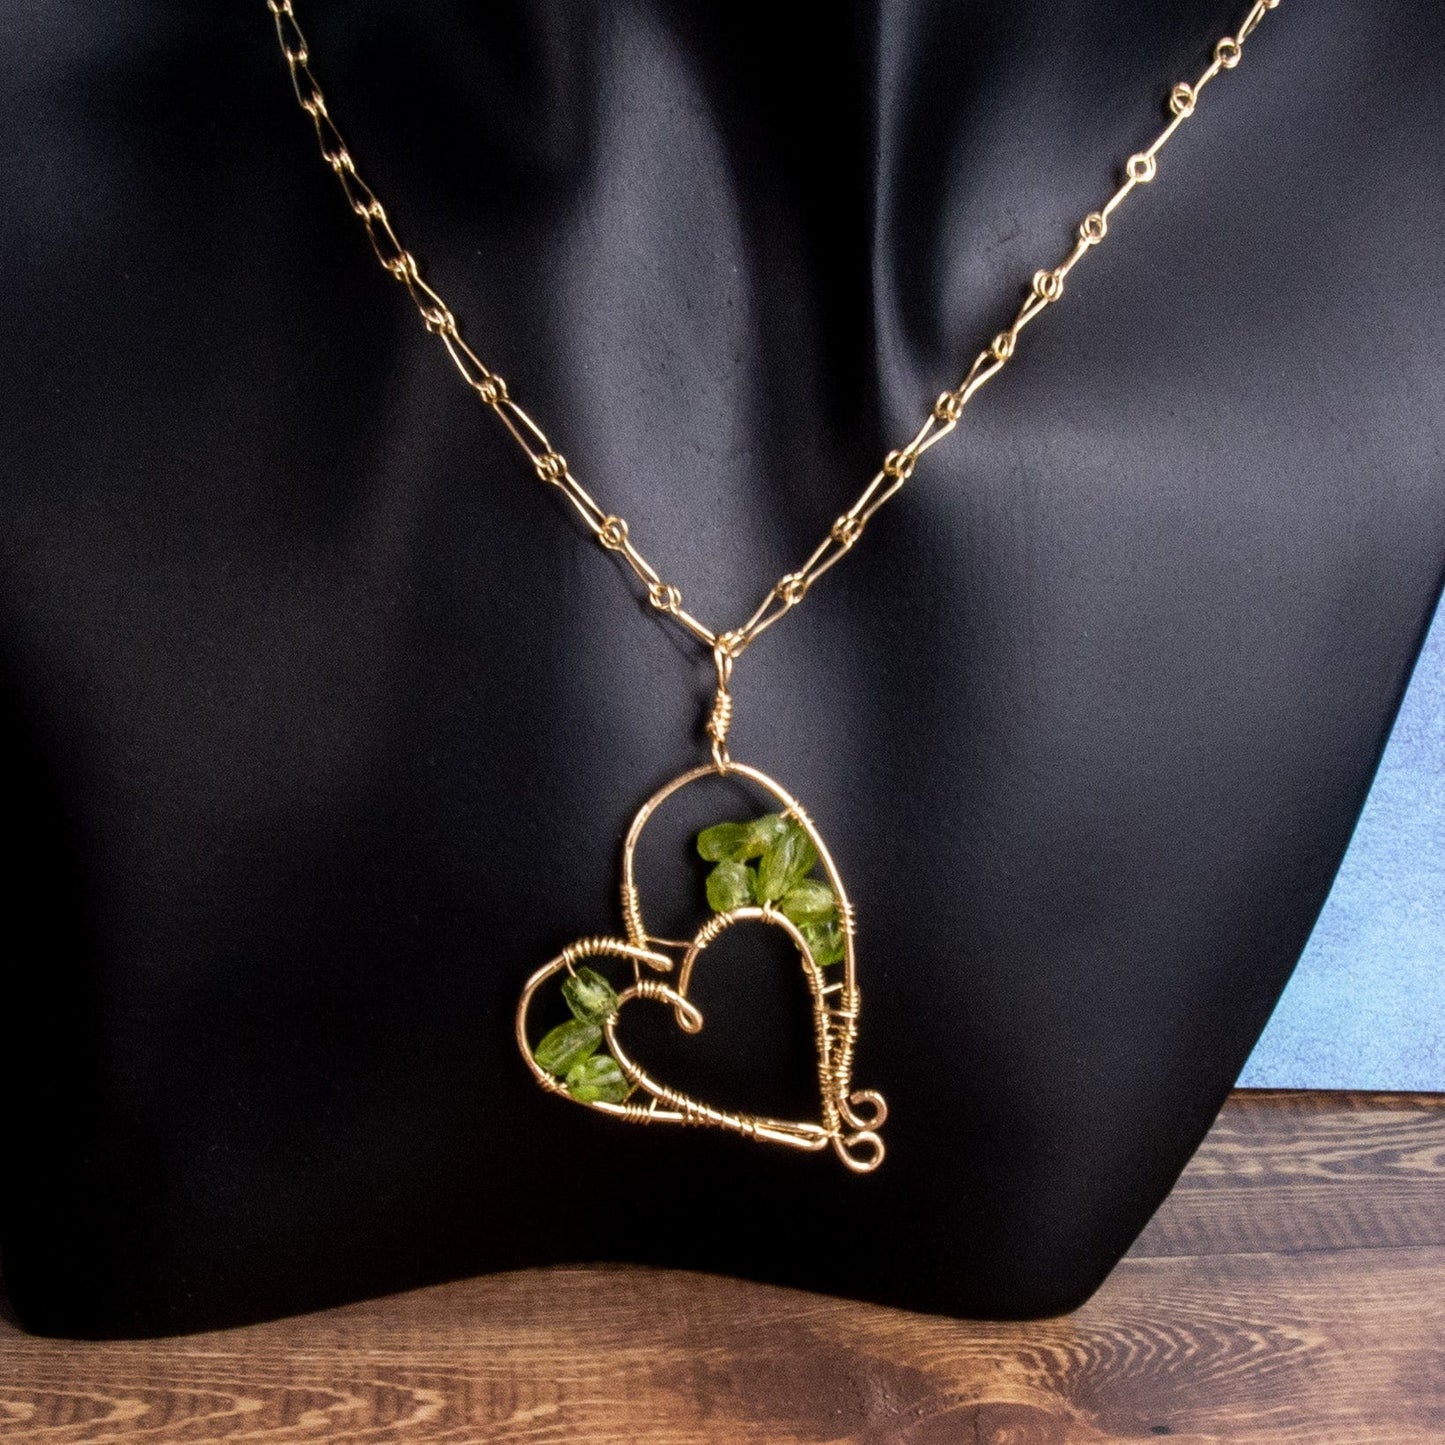 Cheekoo's Handcrafted Double Heart Tree of Life Peridot Gold Necklace - August Birthstone